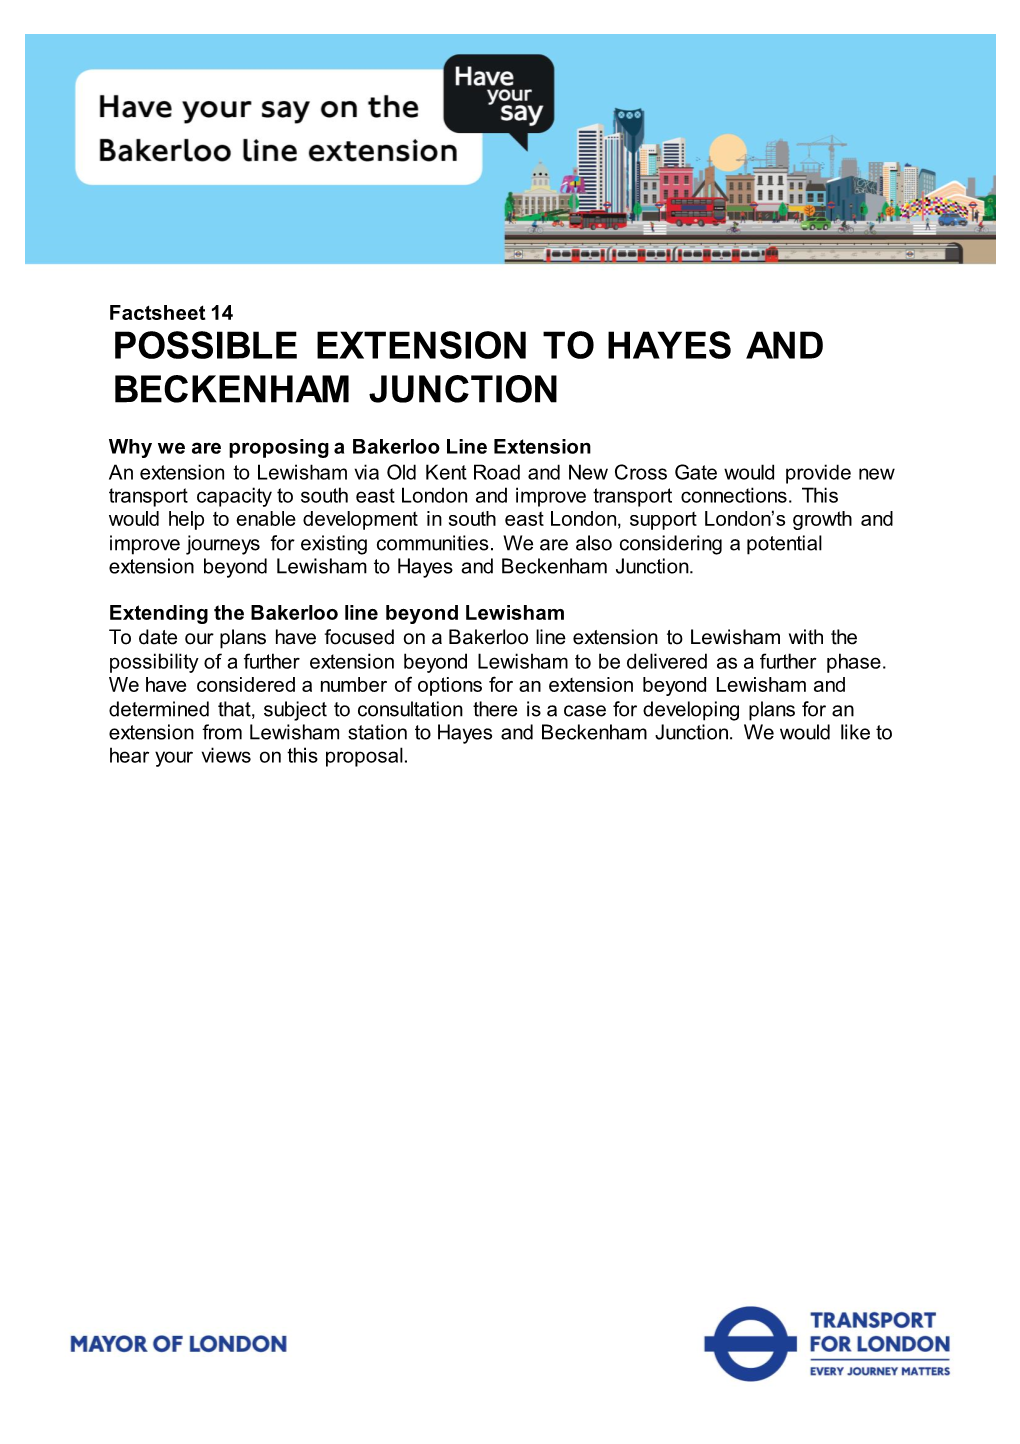 Possible Extension to Hayes and Beckenham Junction